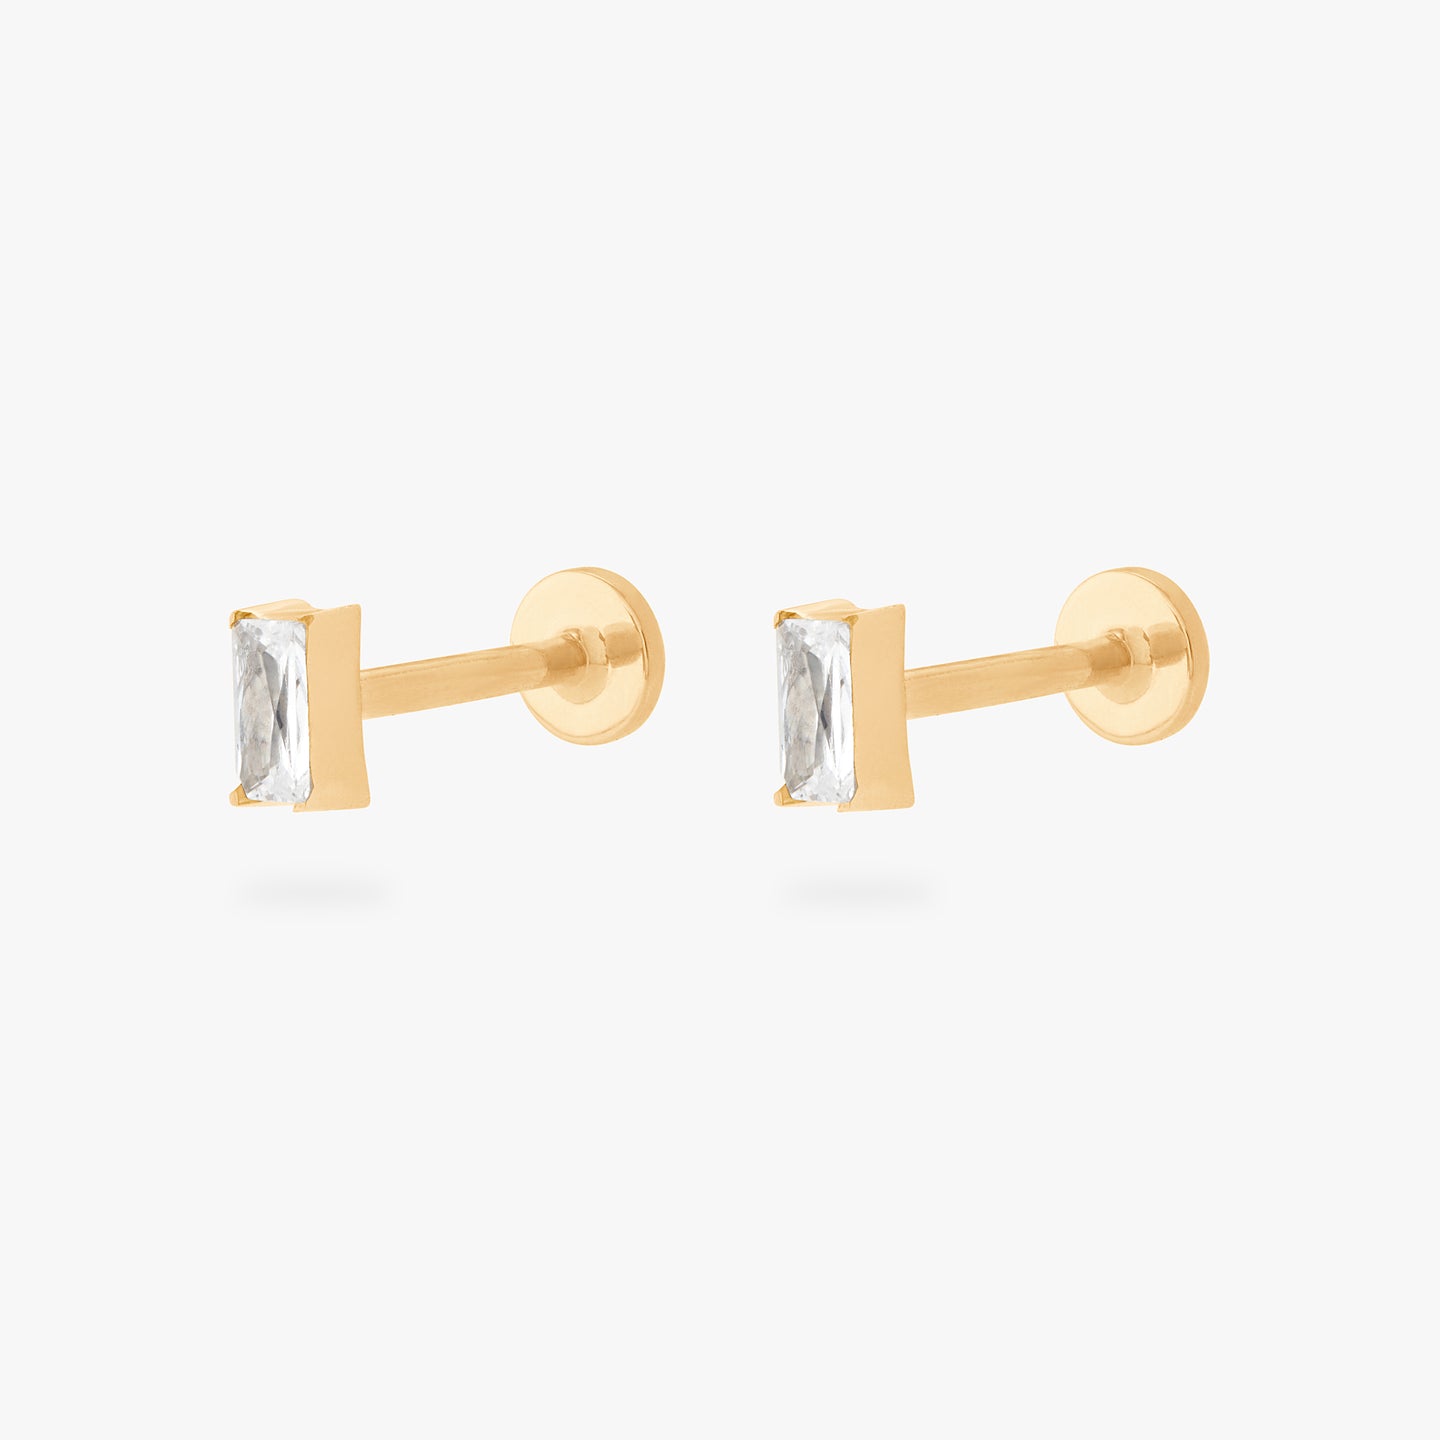 This is an image of a pair of gold/clear baguette shaped CZ flatback studs, with gold labrets with circle discs with 